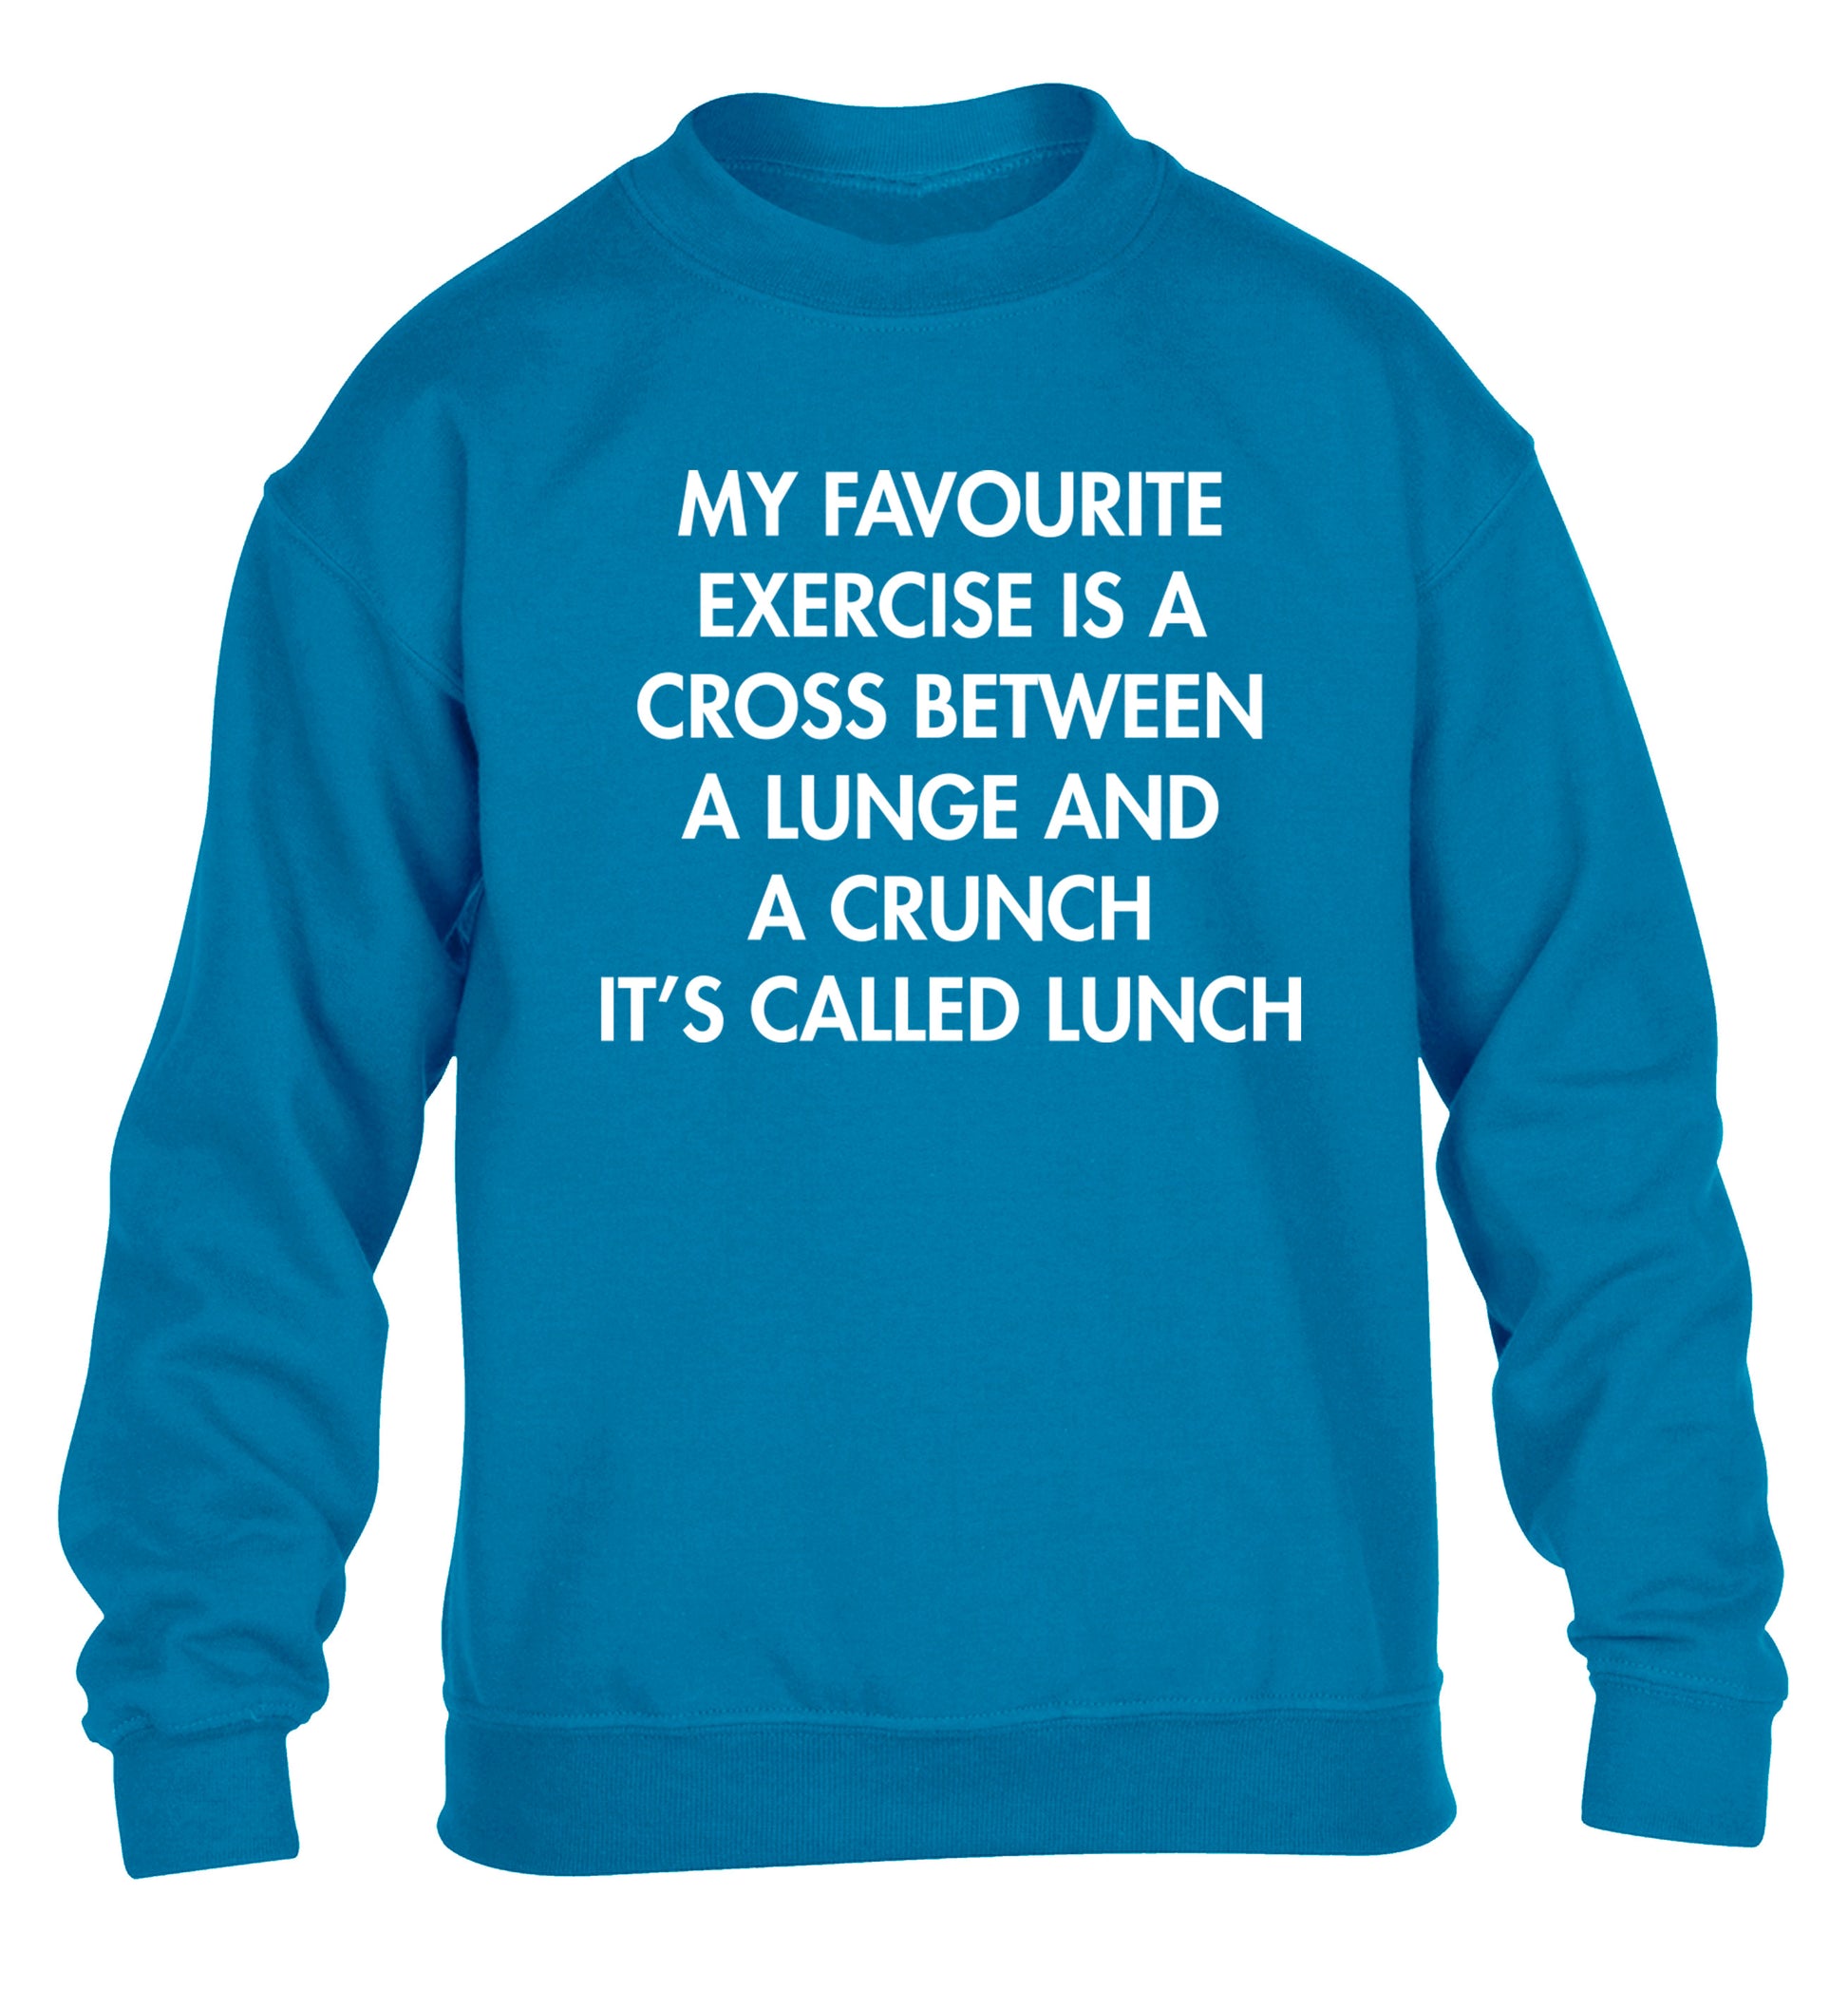 My favourite exercise is a cross between a lung and a crunch it's called lunch children's blue sweater 12-14 Years